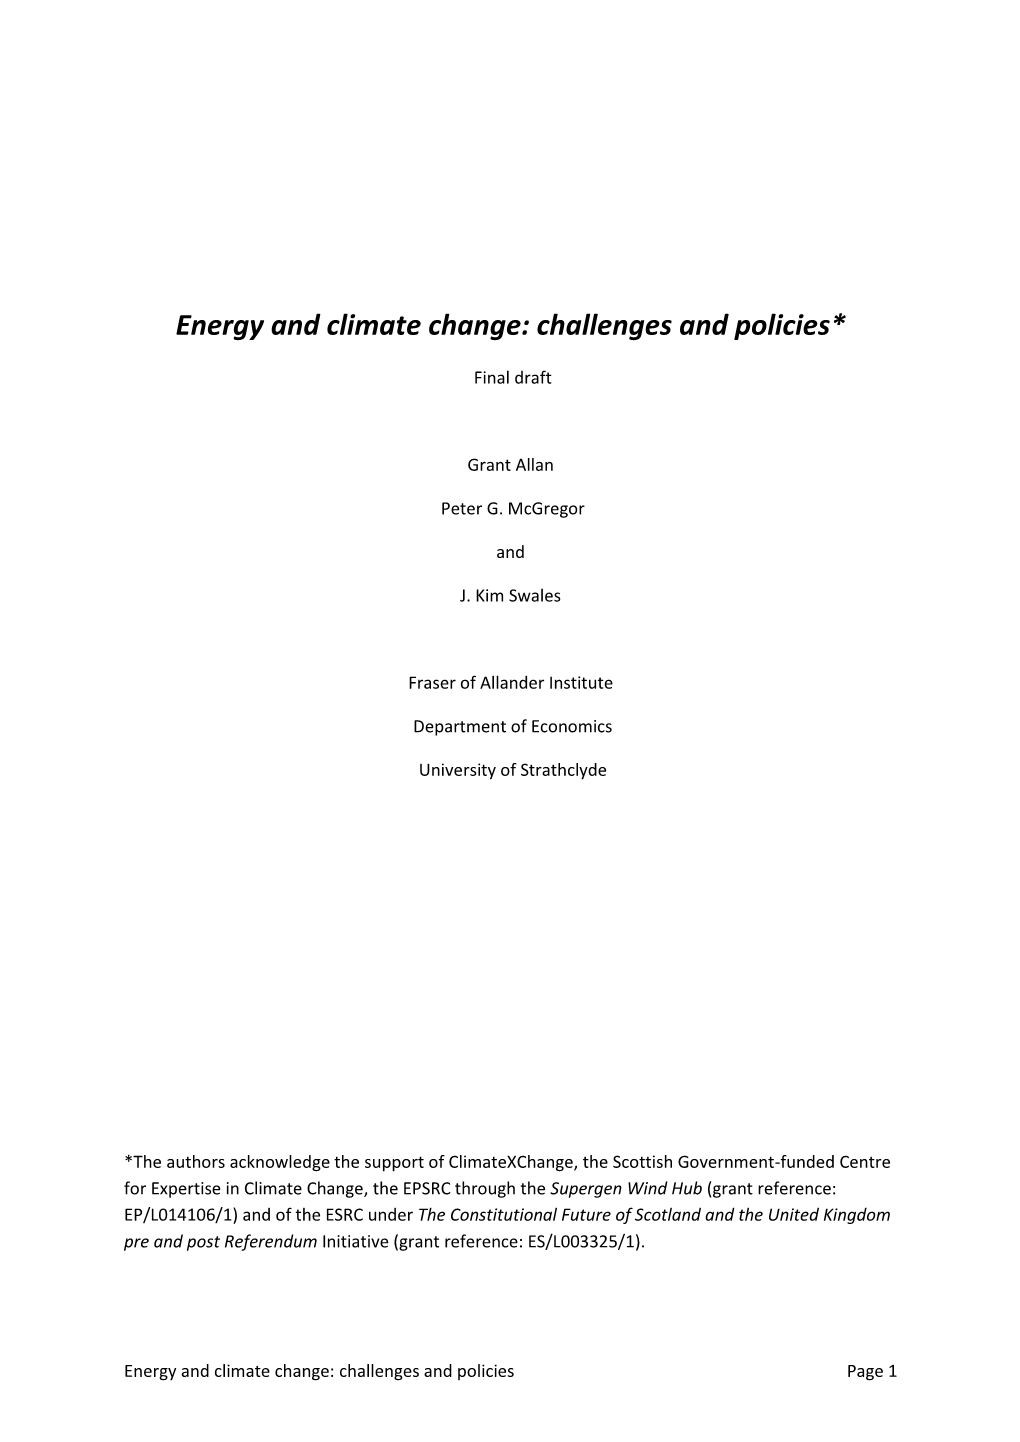 Energy and Climate Change: Challenges and Policies*